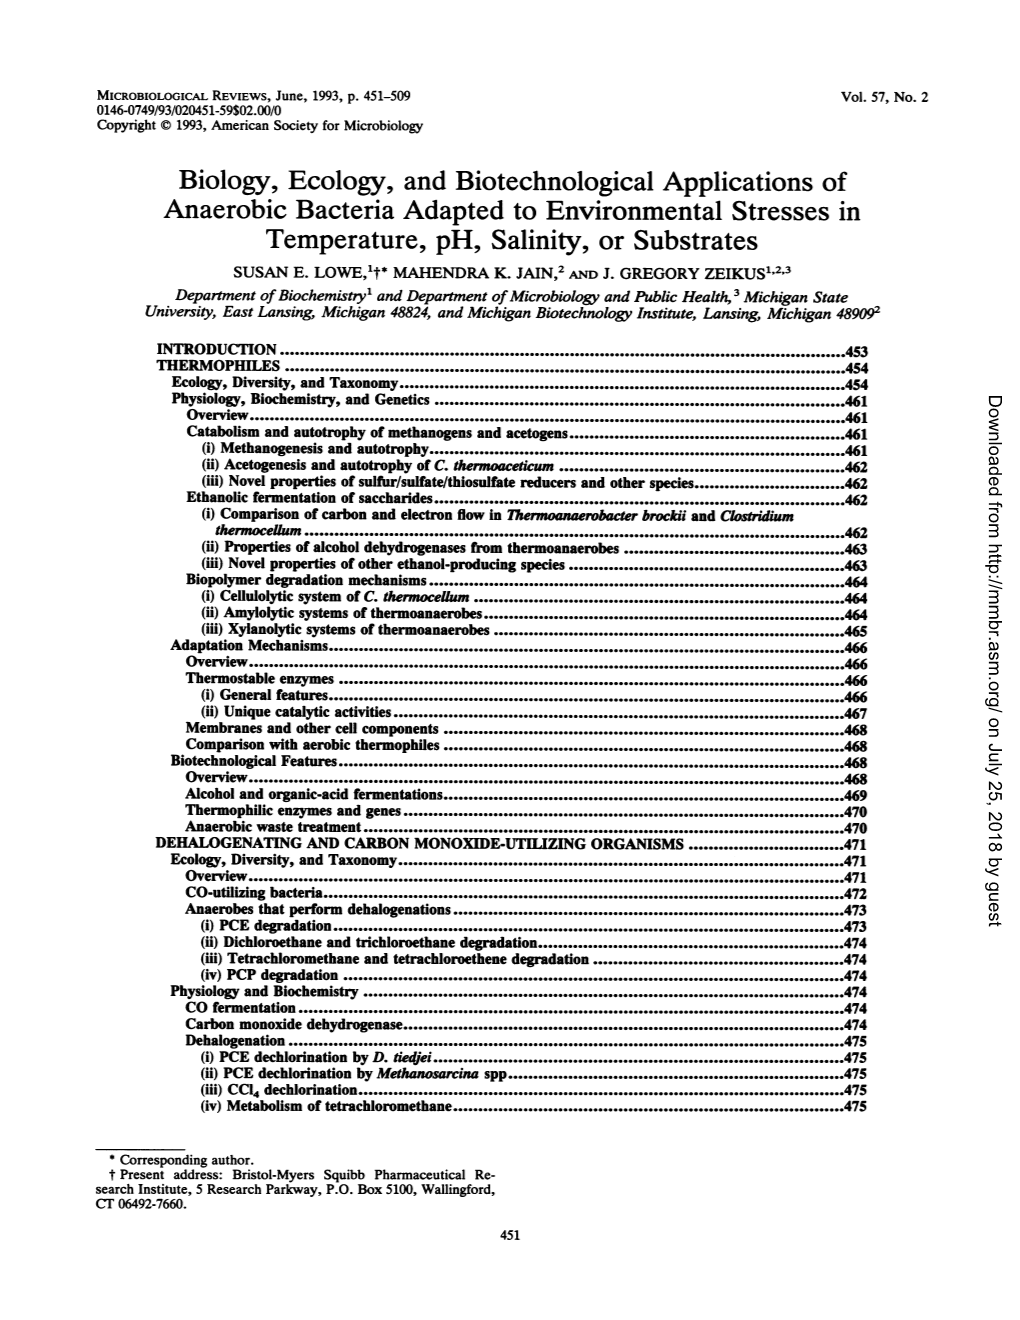 Biology, Ecology, and Biotechnological Applications of Anaerobic Bacteria Adapted to Environmental Stresses in Temperature, Ph, Salinity, Or Substrates SUSAN E